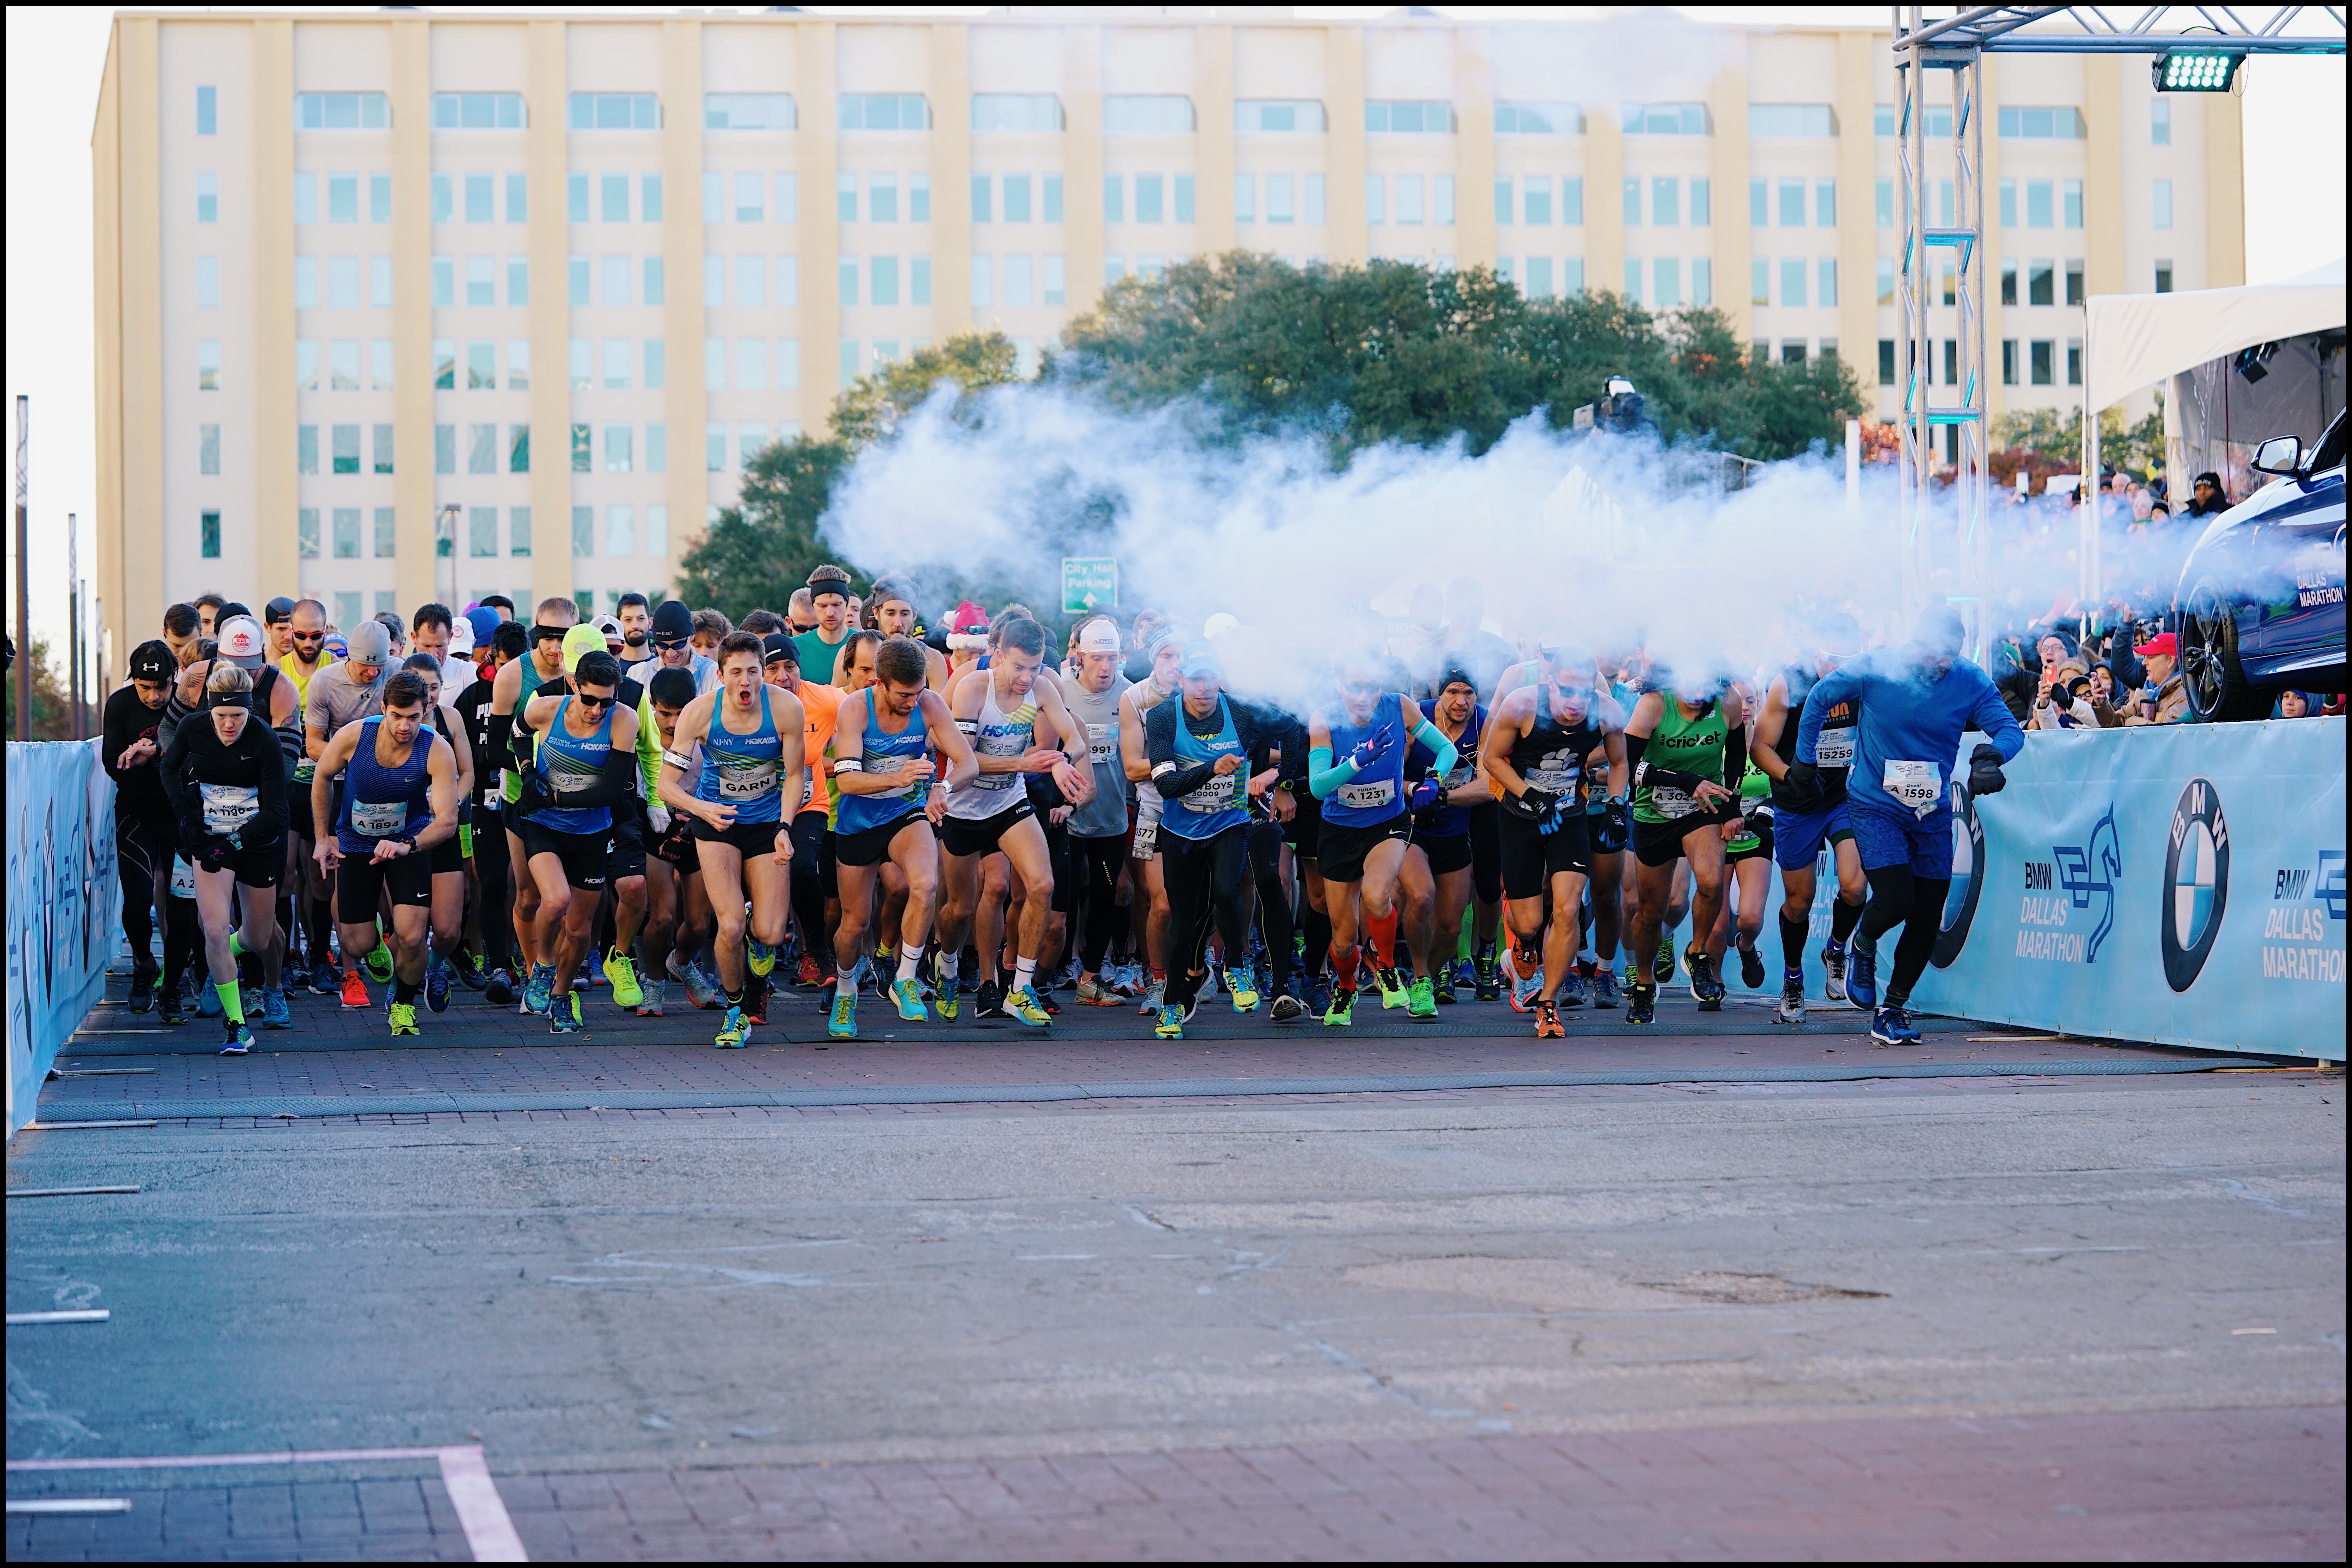 Since naming a primary beneficiary in 1997 the Dallas Marathon has donated more than $3 9 million to Texas Scottish Rite Hospital for Children